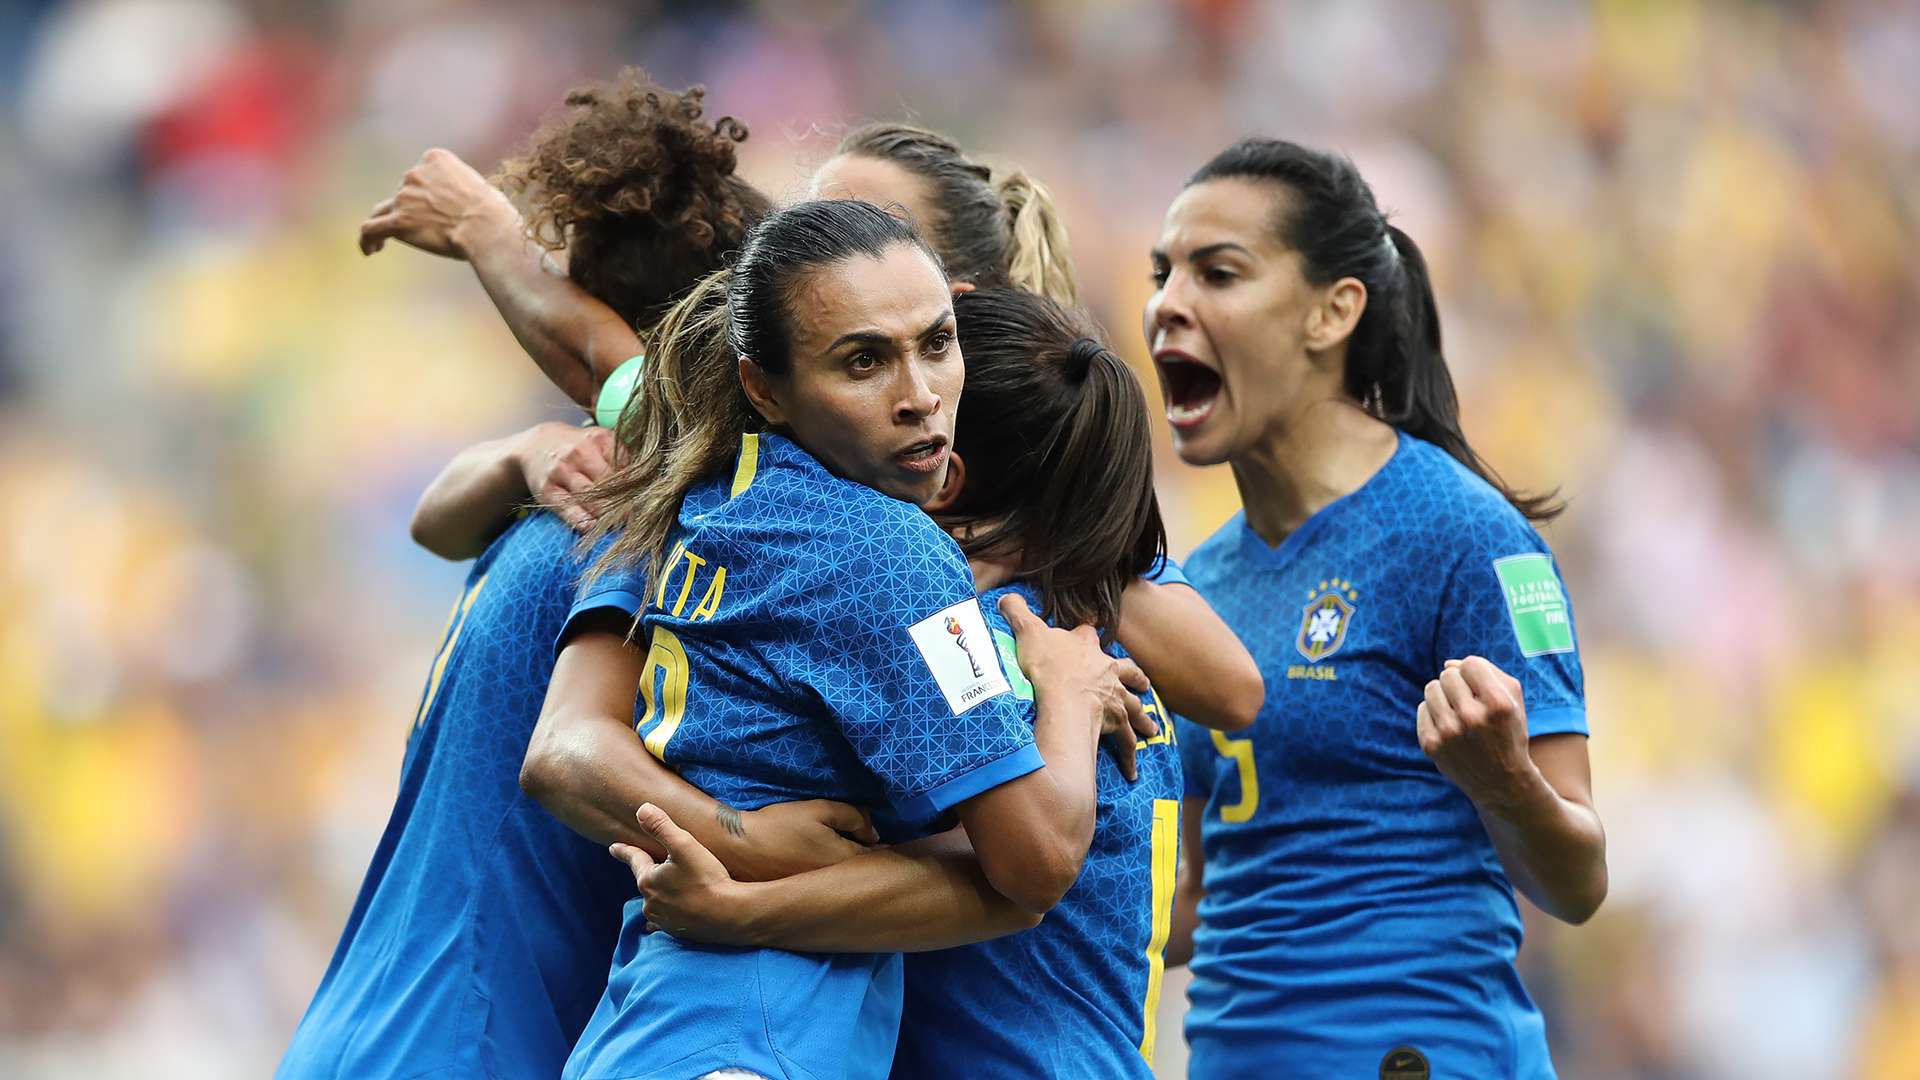 Italy Women vs Brazil Women Betting Tips: Latest odds, team news, preview and predictions